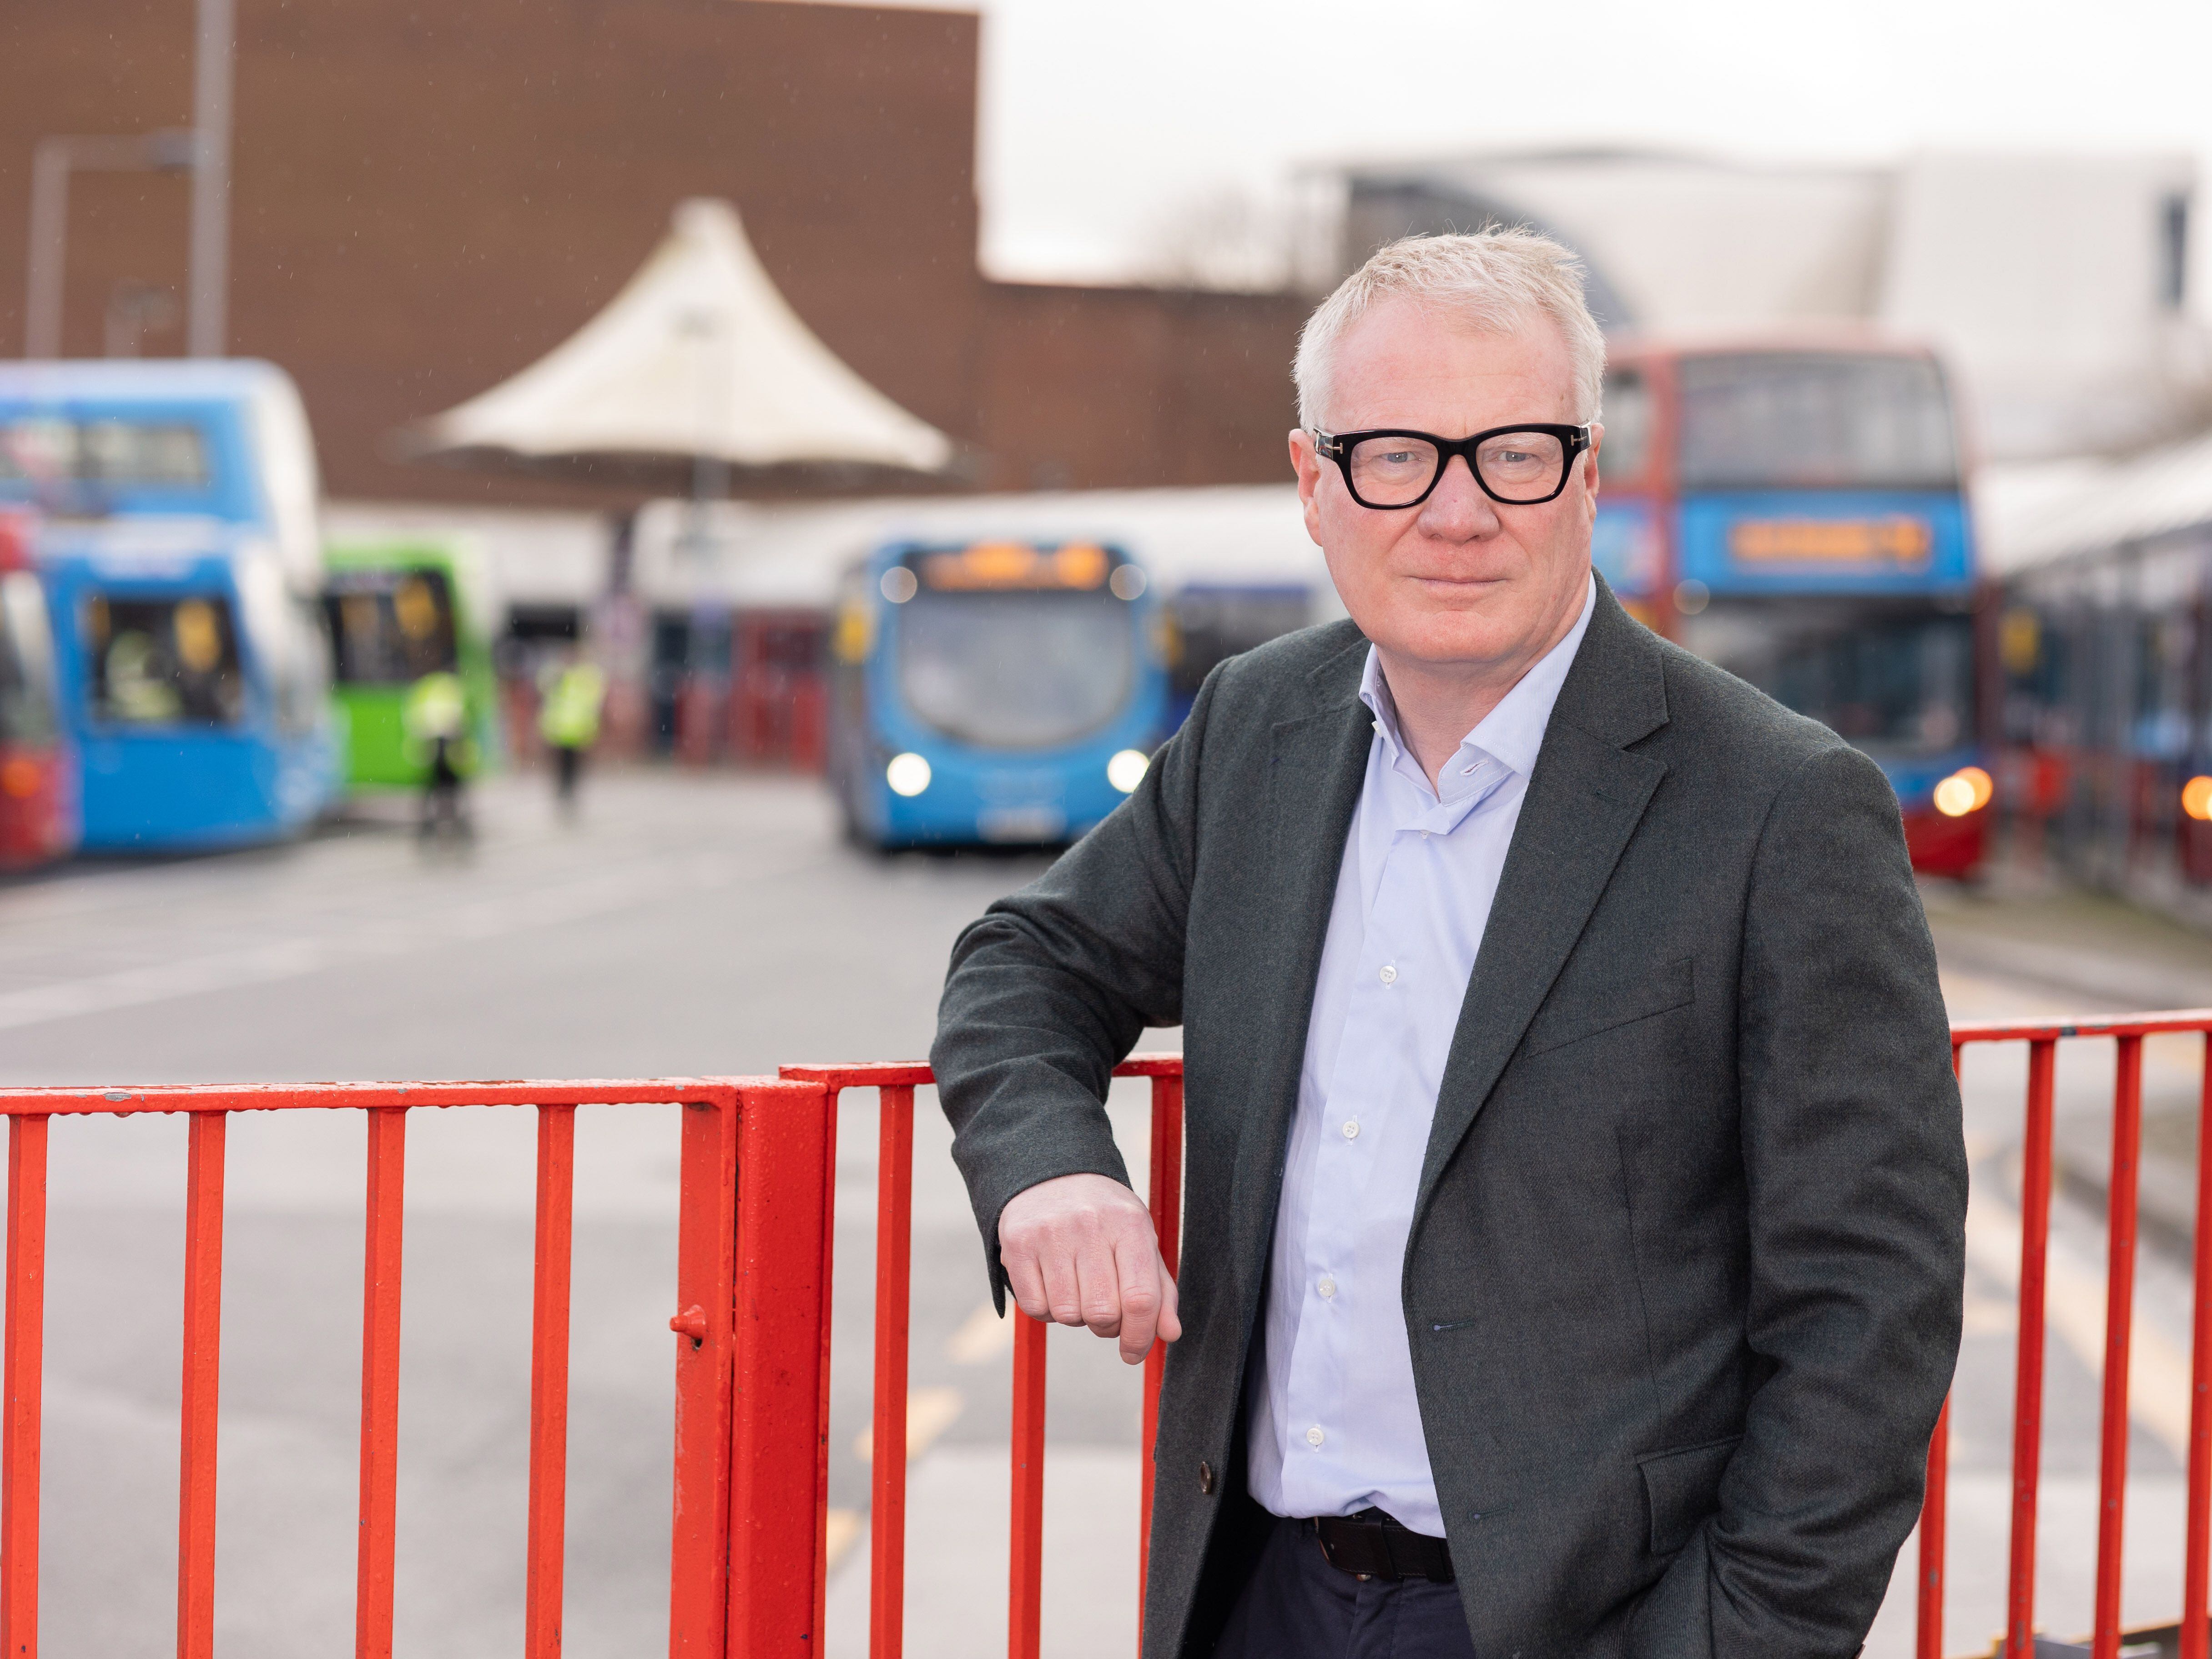 New mayor unveils £25 million plan to take control of buses